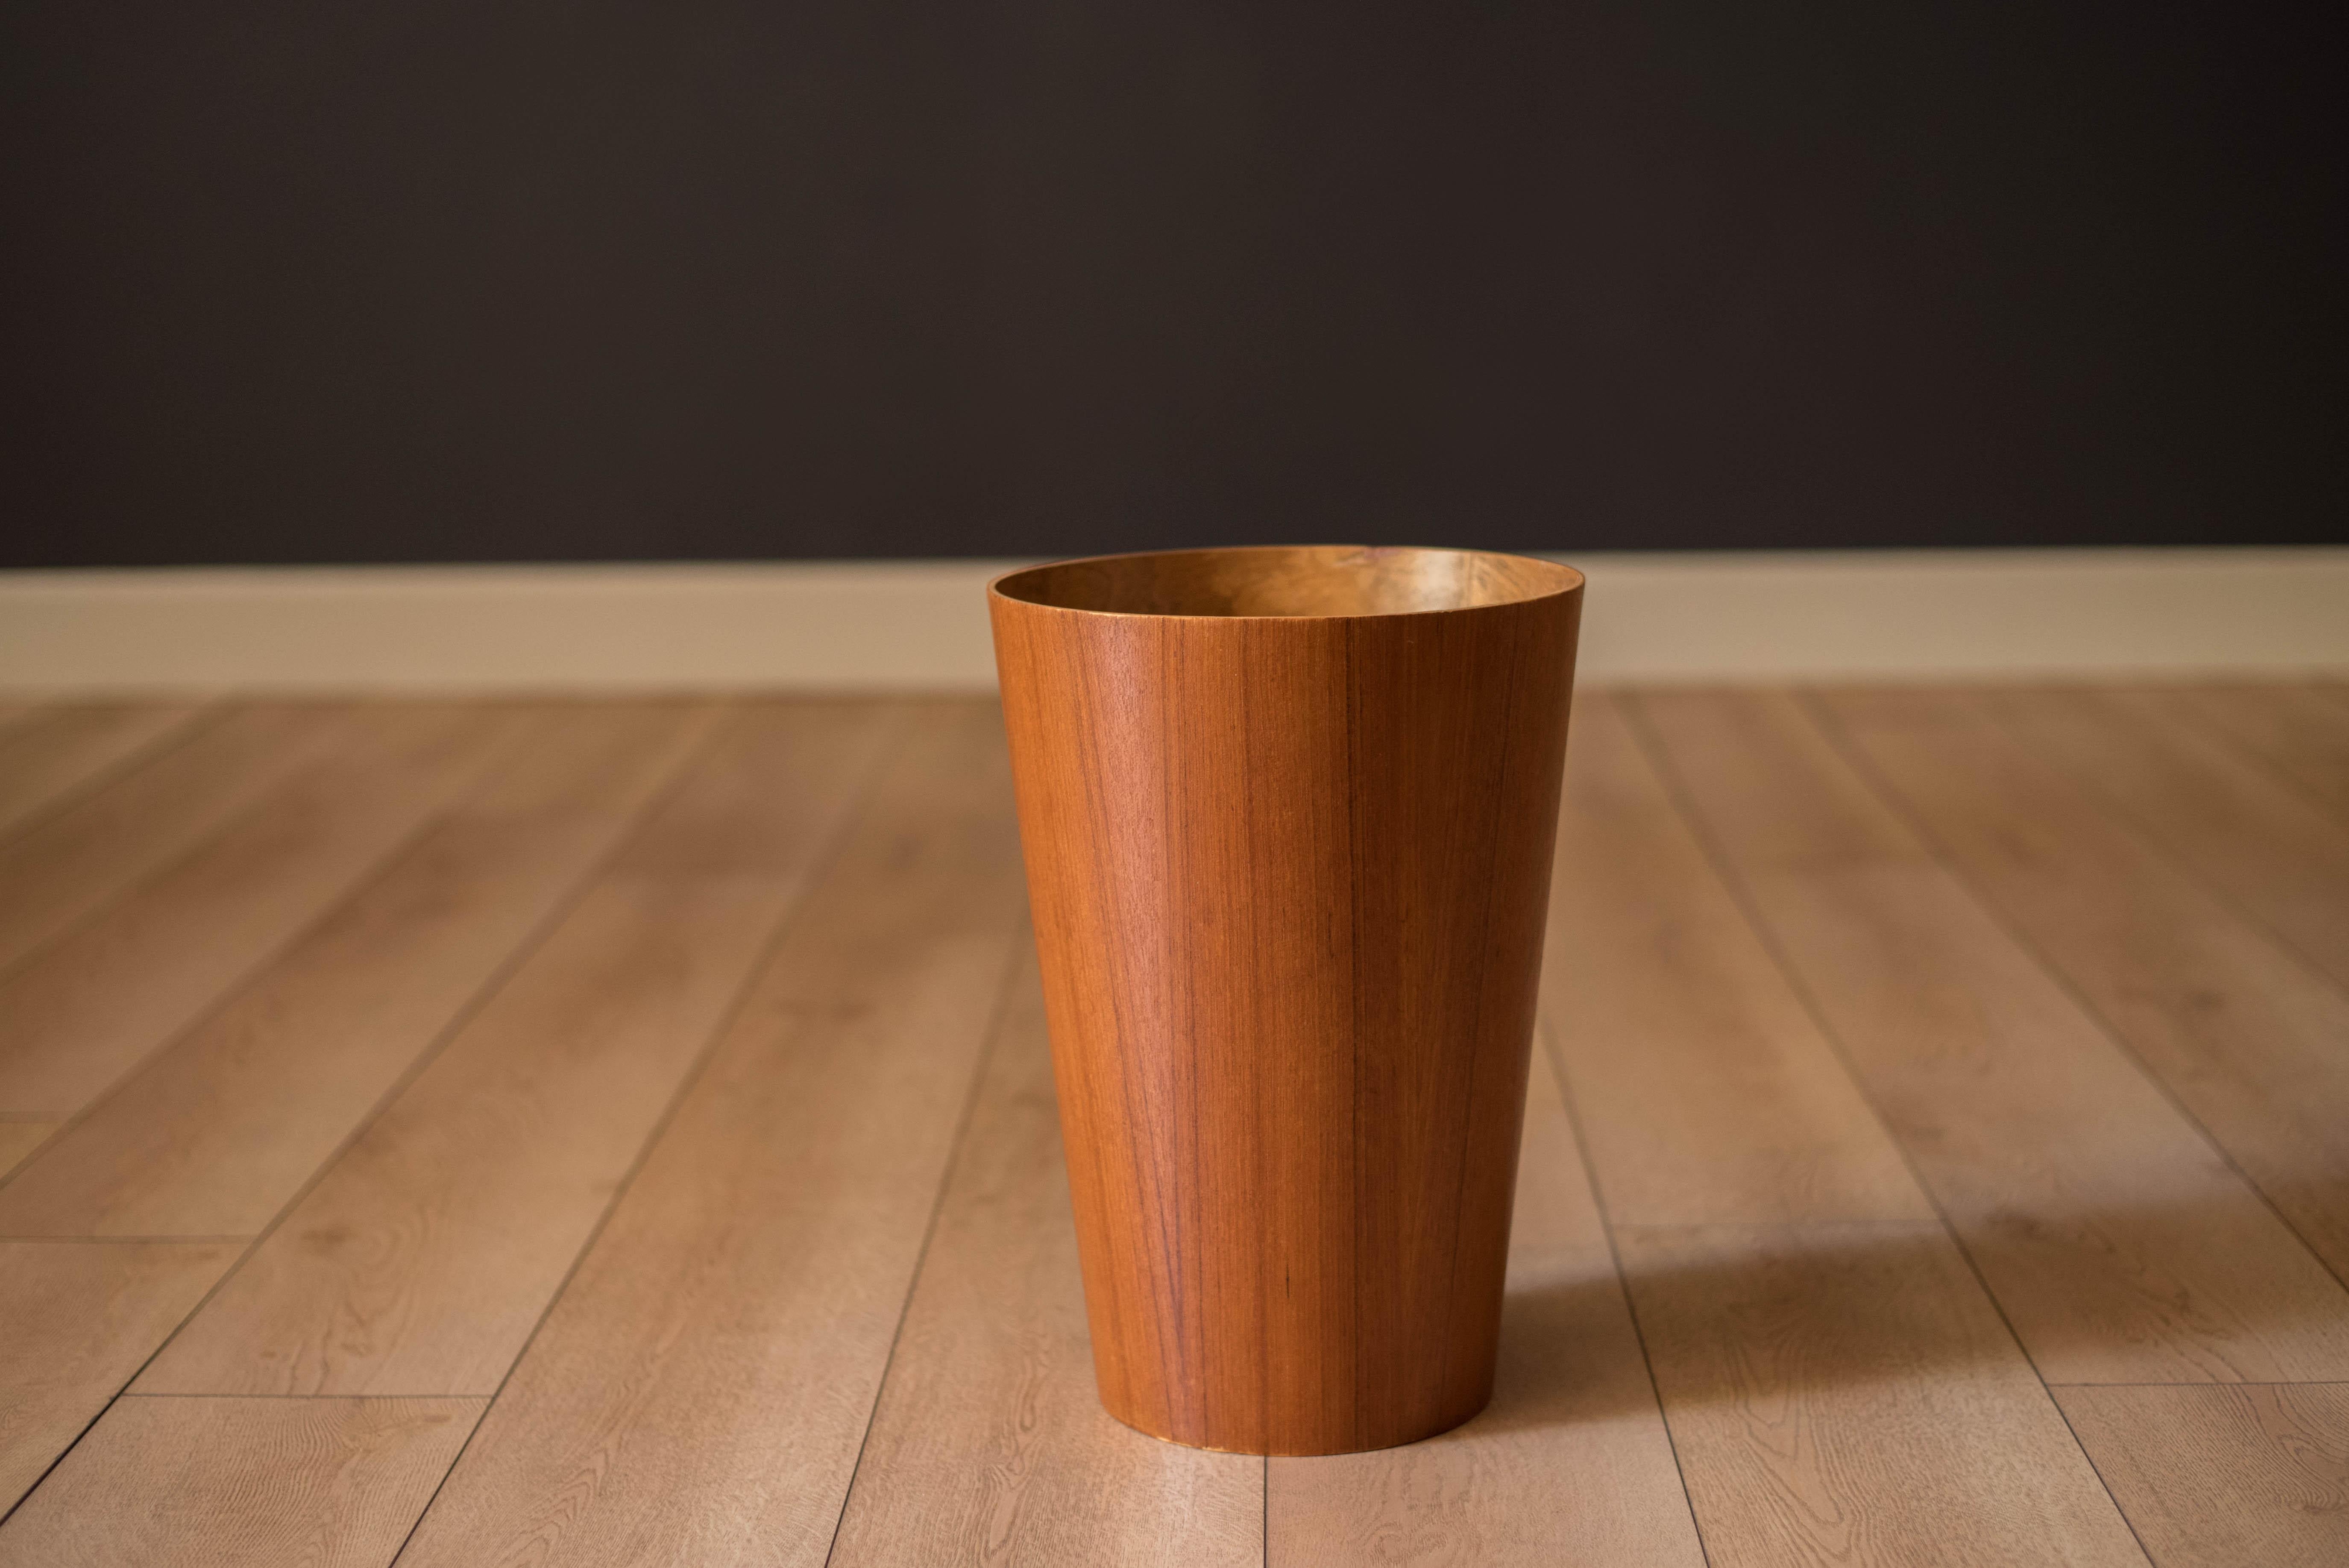 Vintage mid century waste paper bin in teak, circa 1960s. This functional decor piece is the perfect accessory for any office or home interior.